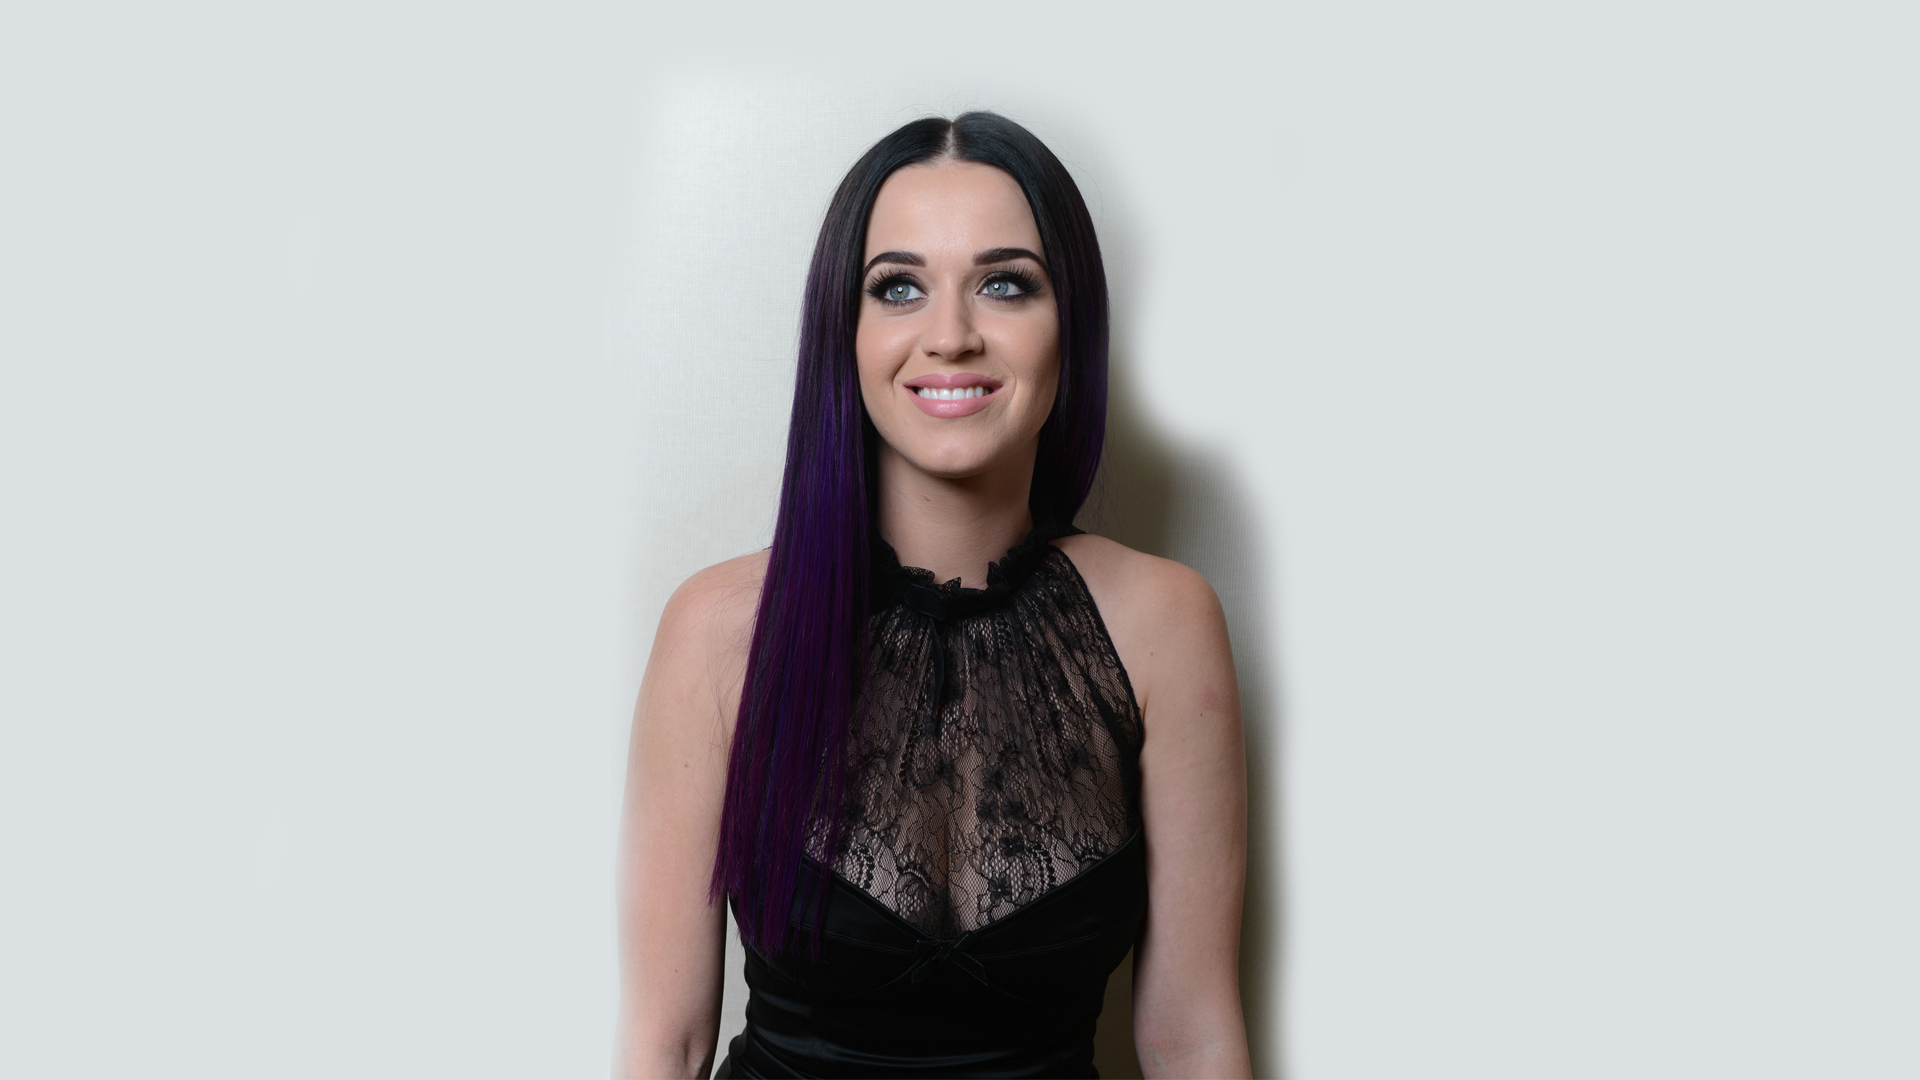 People 1920x1080 Katy Perry celebrity cleavage singer smiling white background studio makeup purple hair dyed hair looking away pink lipstick women